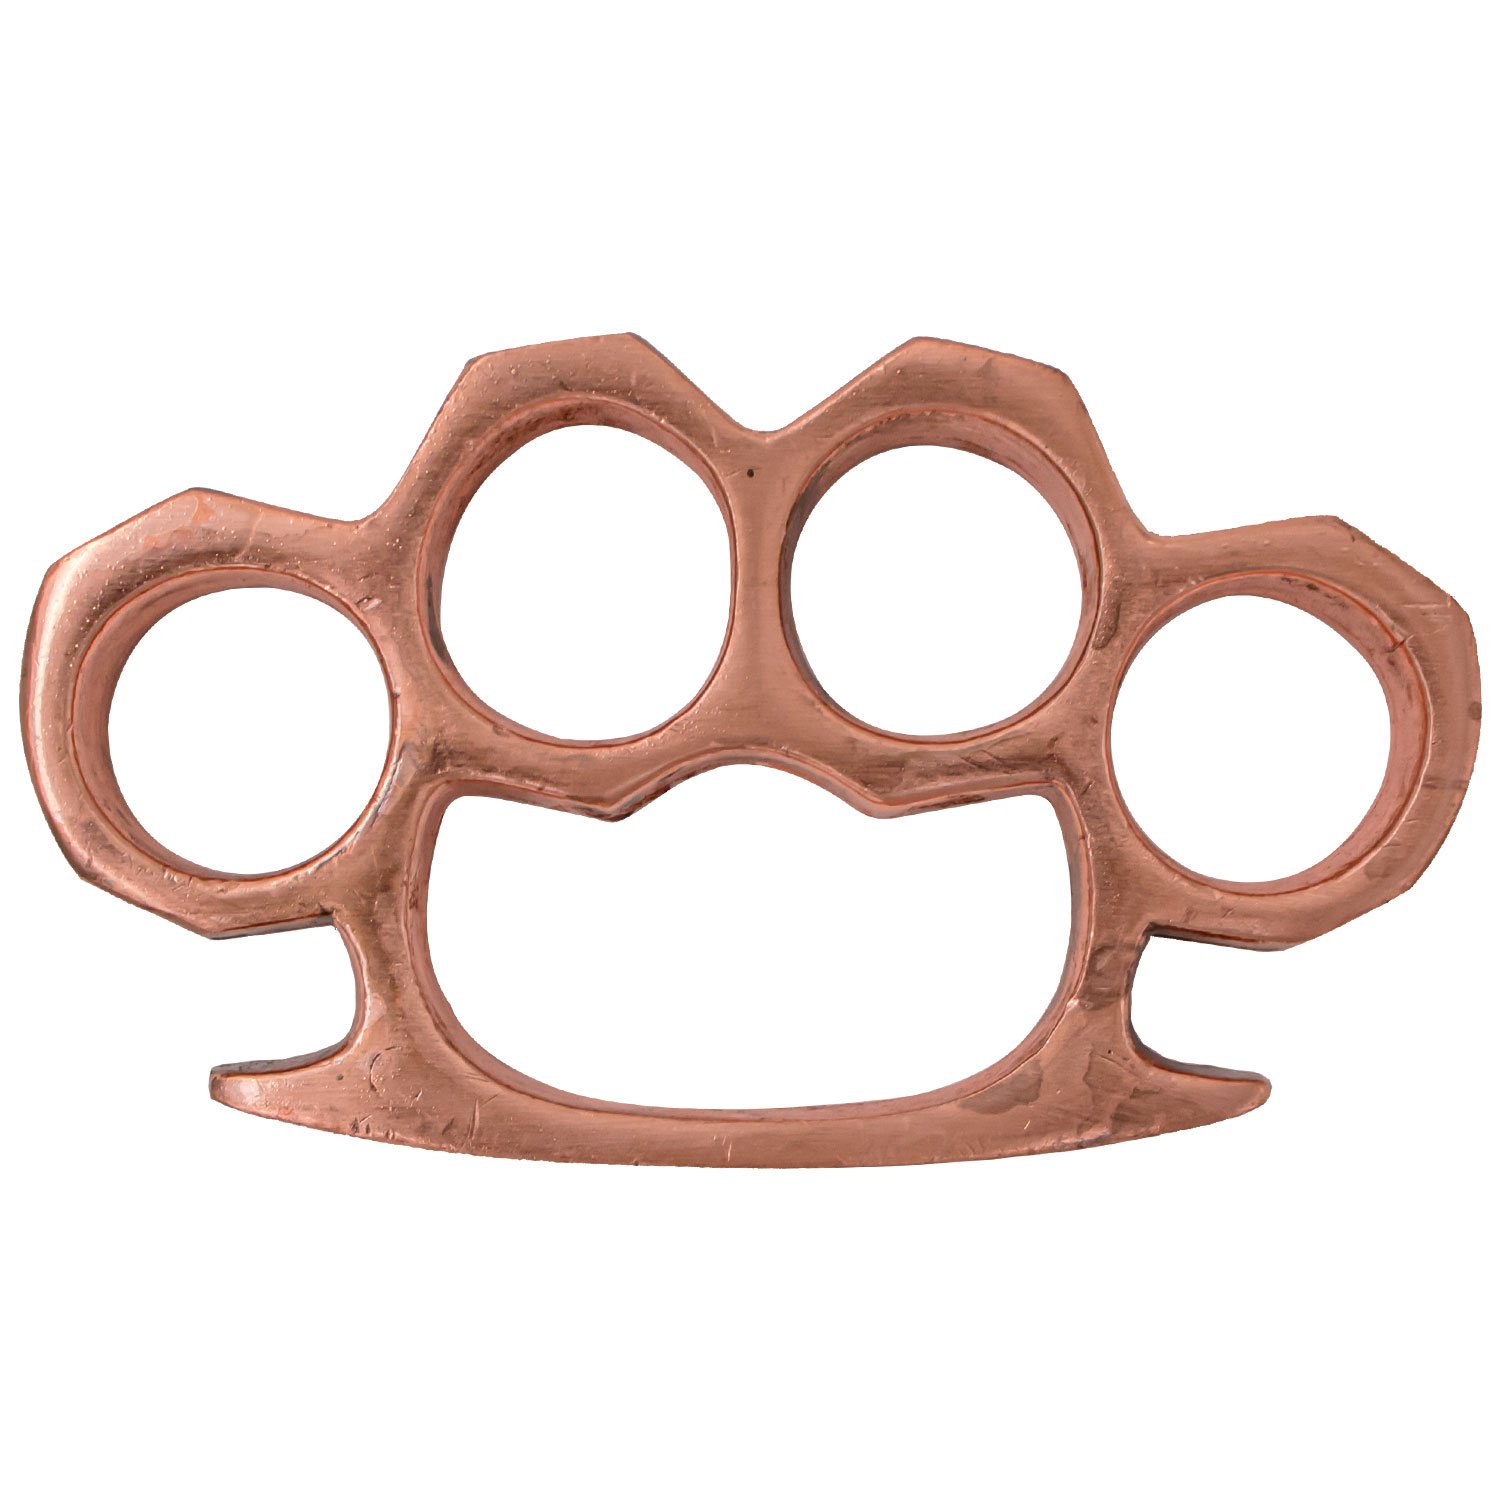 4.5 Inch Long Carbon Iron Solid Steel Knuckle Duster Copper